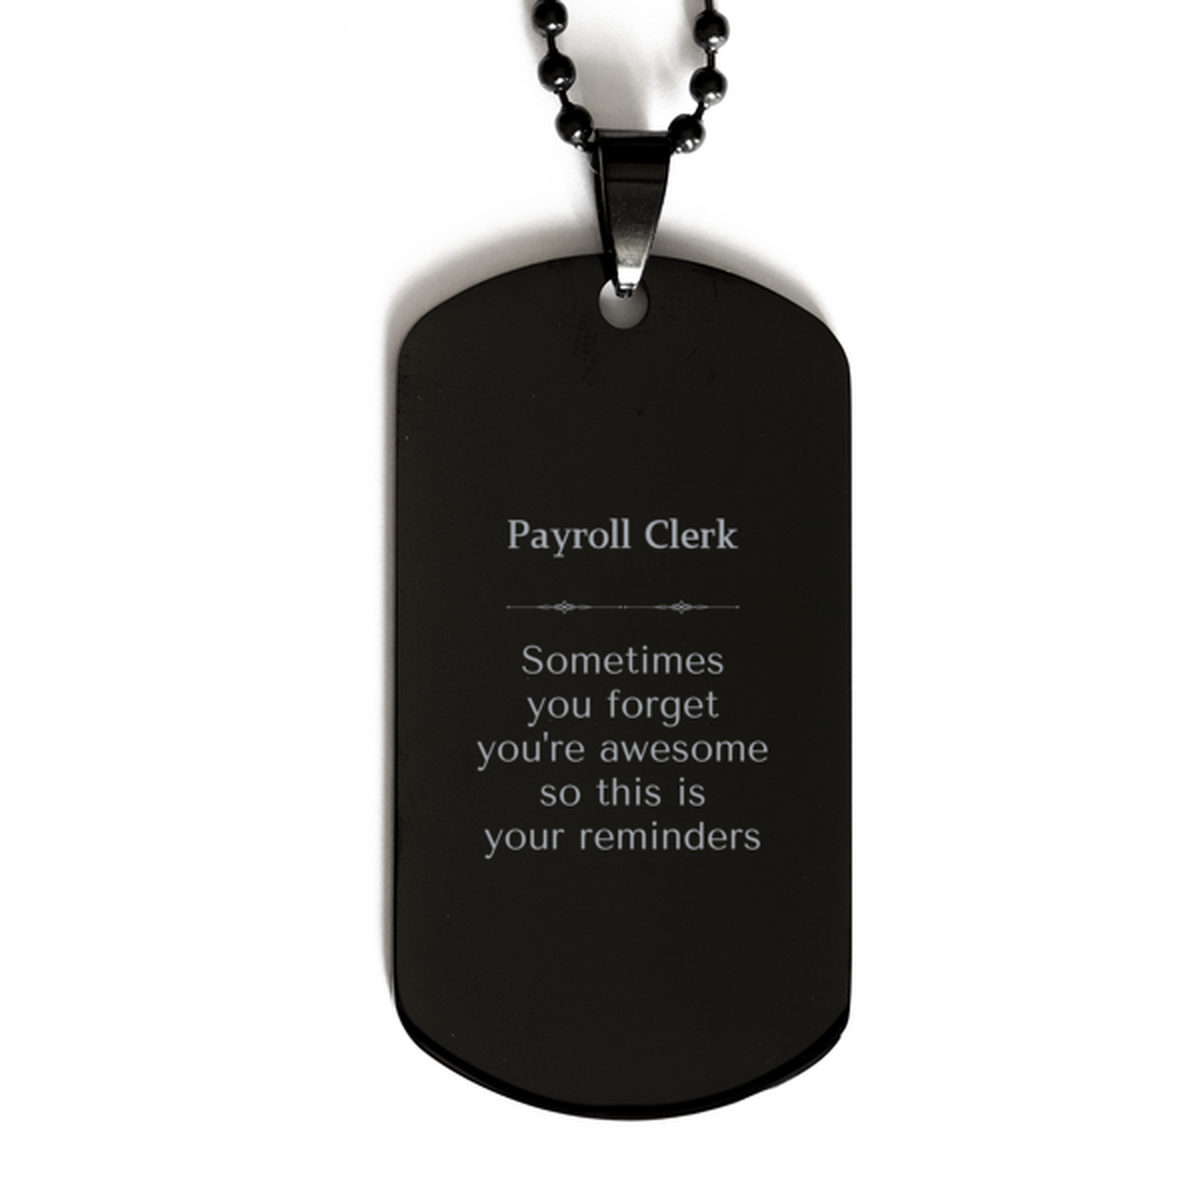 Sentimental Payroll Clerk Black Dog Tag, Payroll Clerk Sometimes you forget you're awesome so this is your reminders, Graduation Christmas Birthday Gifts for Payroll Clerk, Men, Women, Coworkers